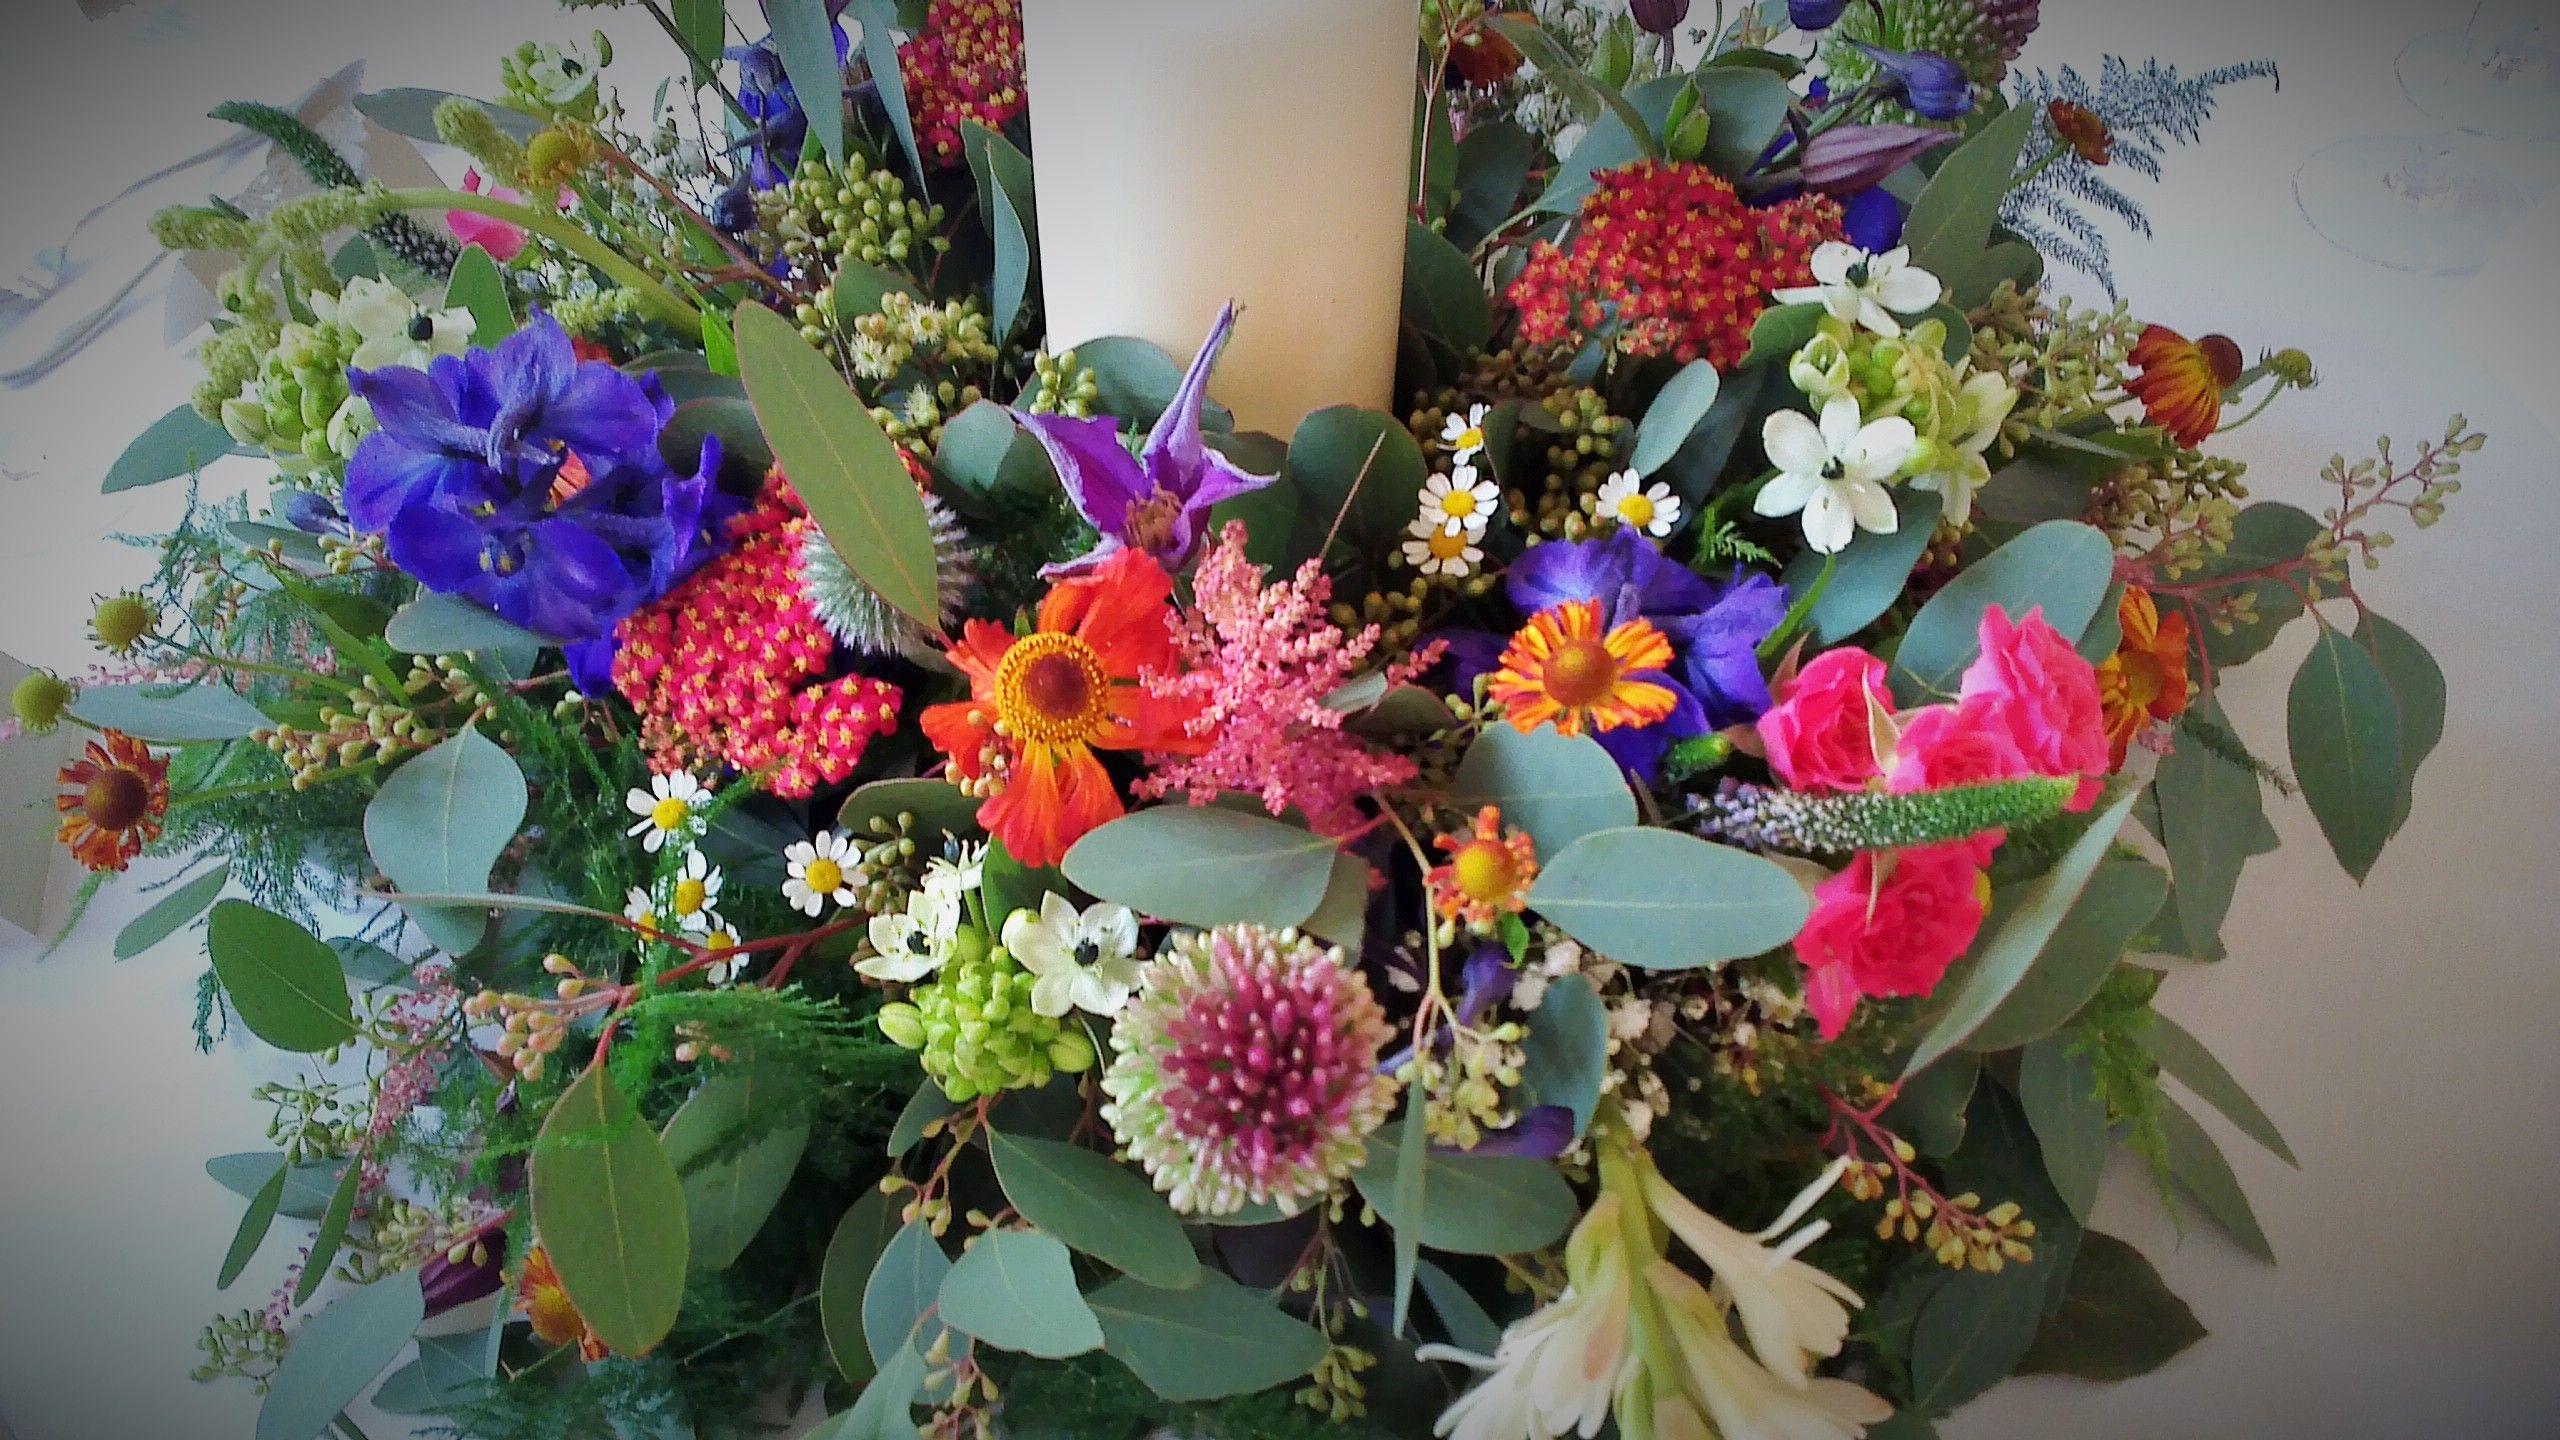 Unstructured vibrant flowers from The Wilde Bunch. Candles